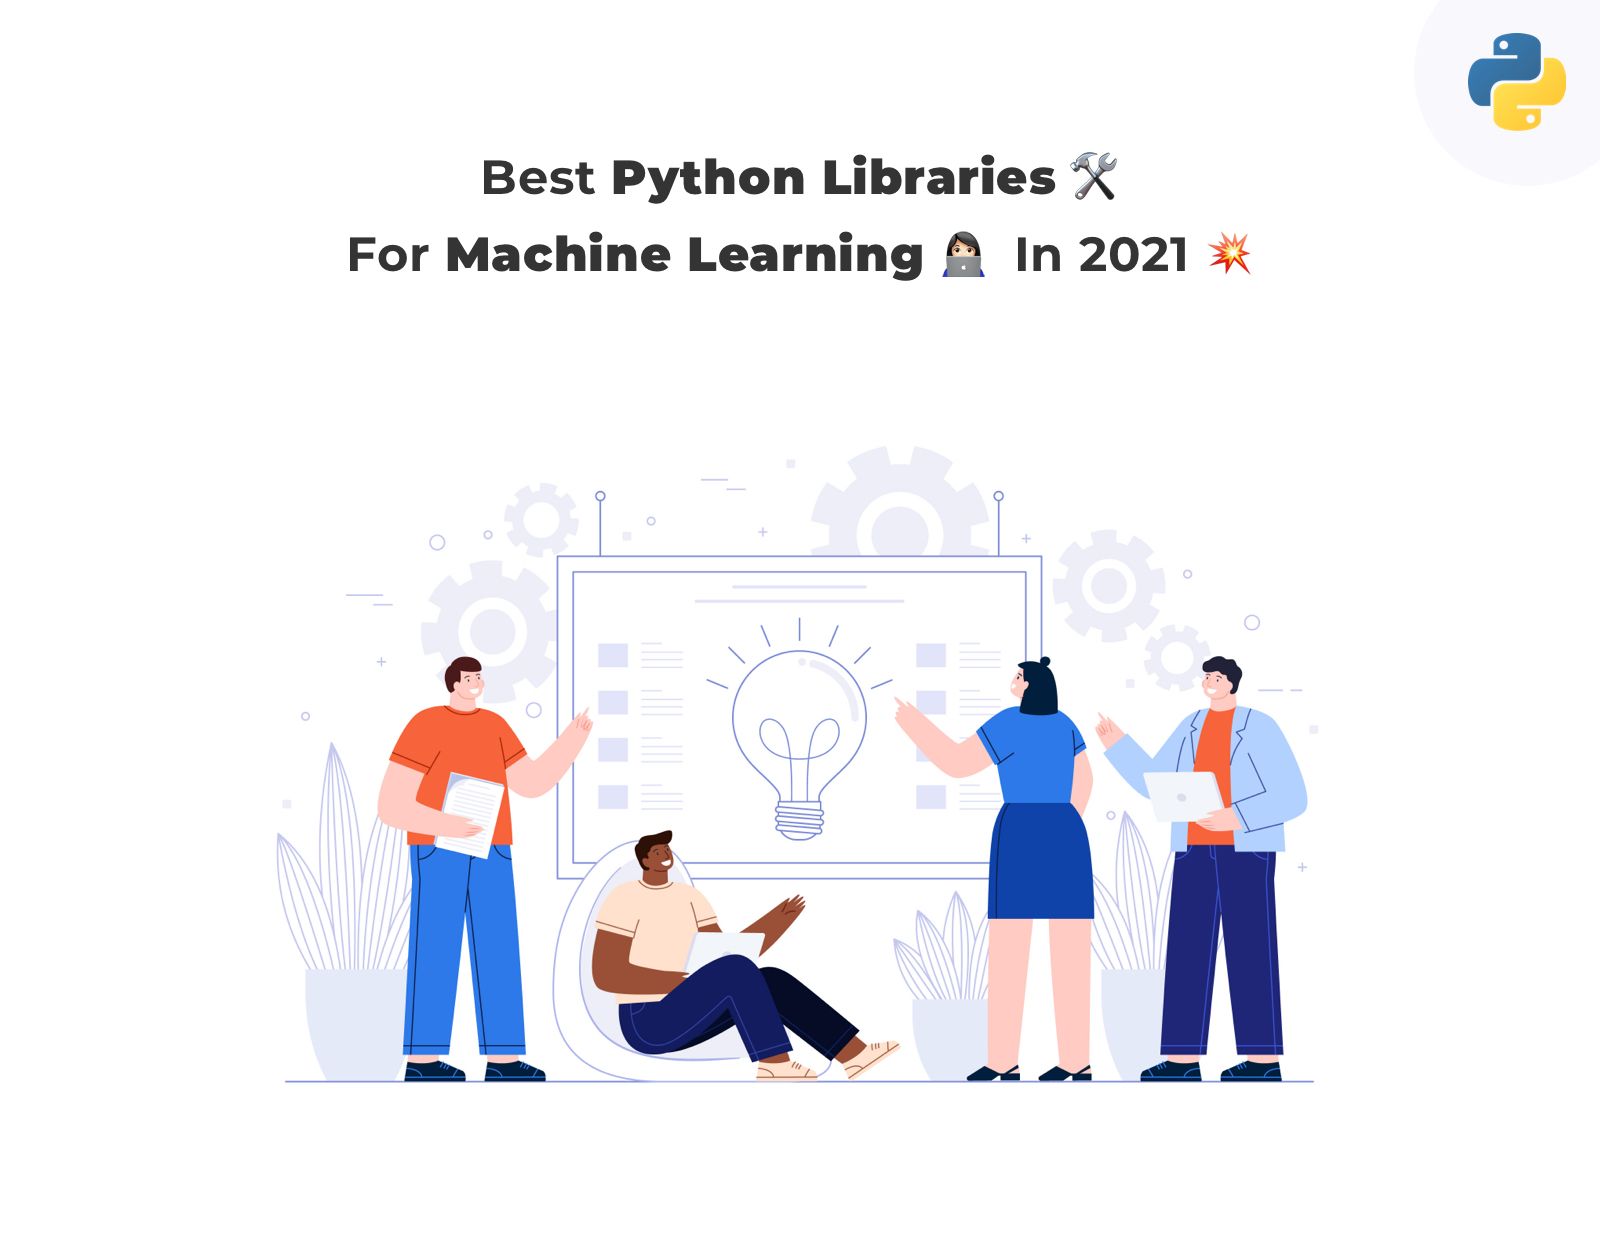 8 Best Python Libraries  For Machine Learning in 2021